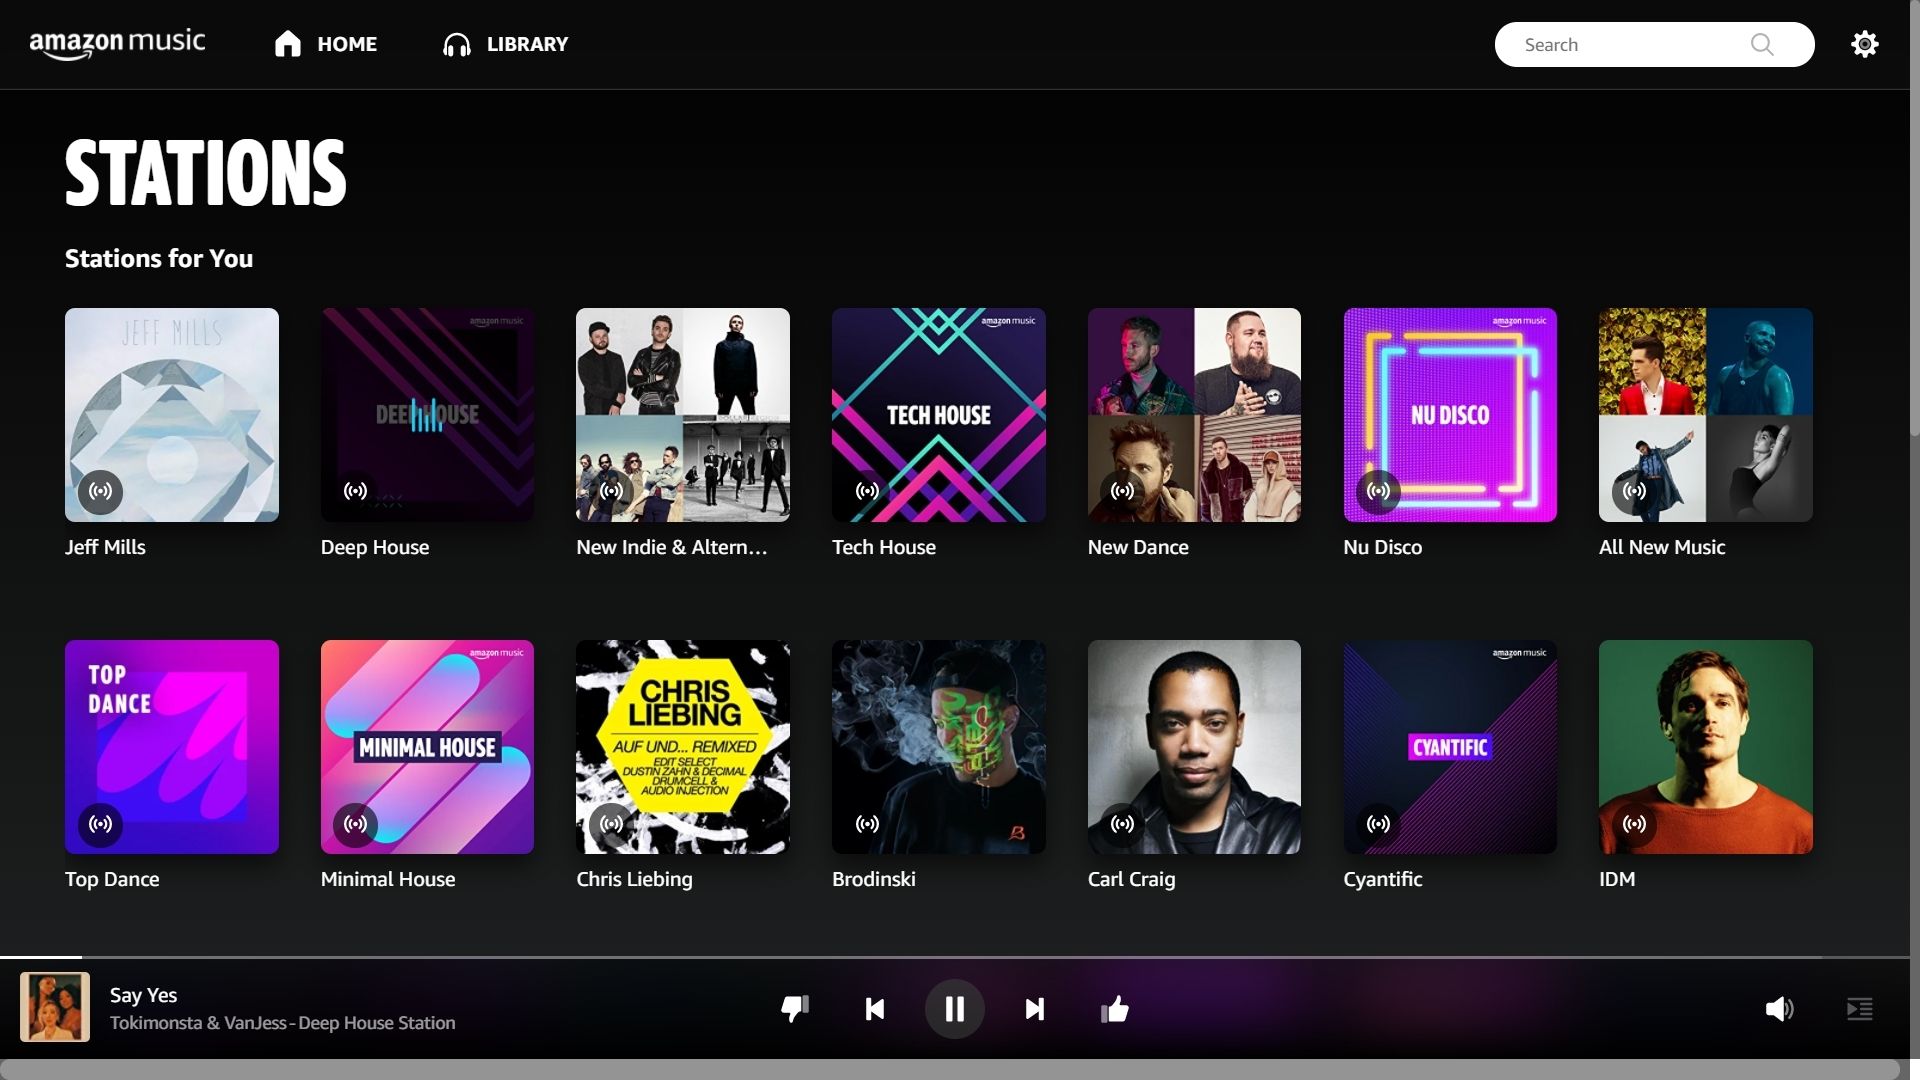 What Are The Amazon Music Stations